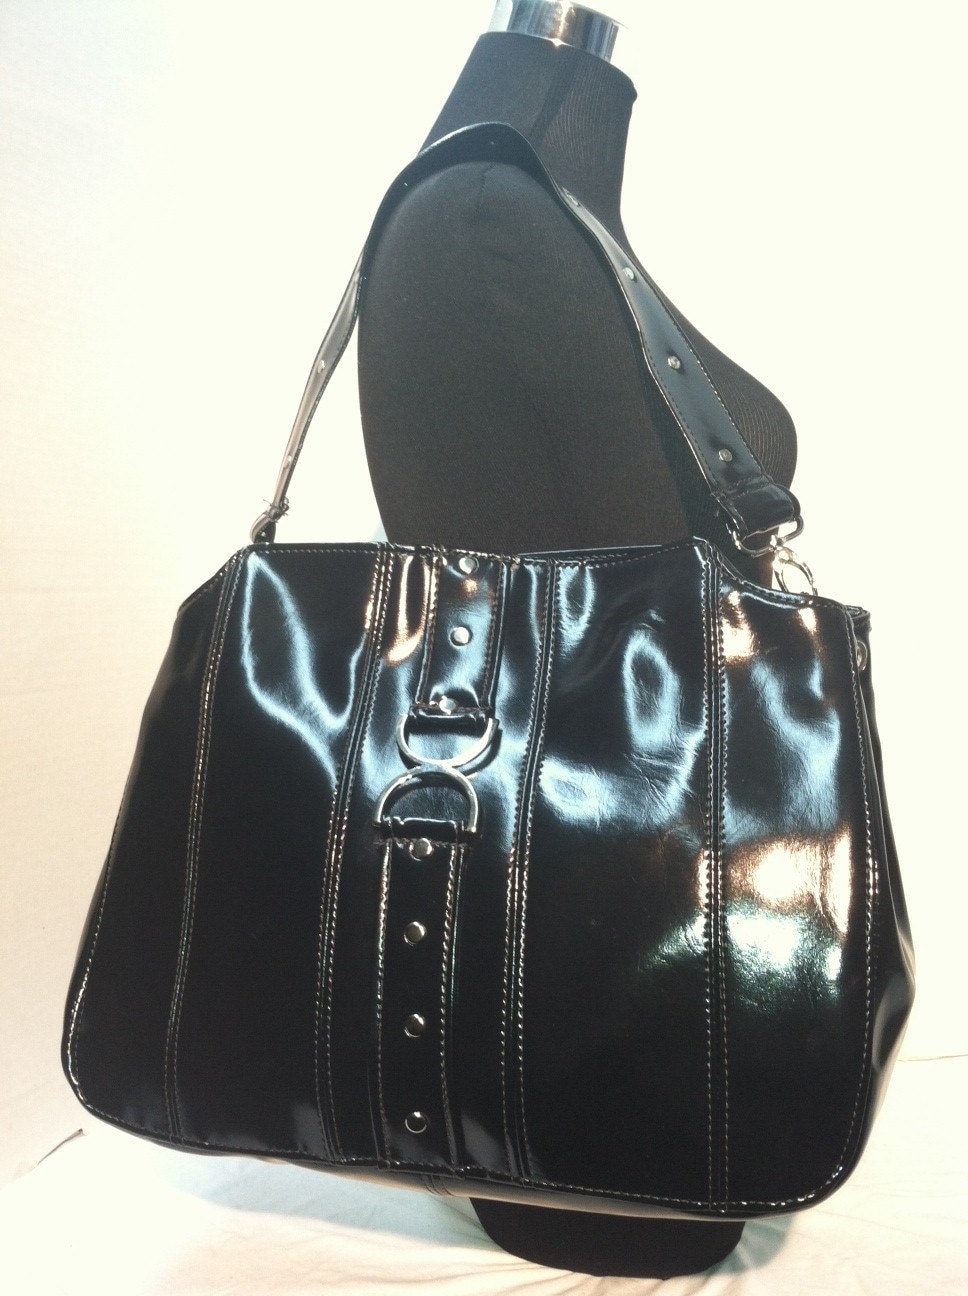 Black Patent Leather Large Tote Bag Ready To Ship by lfjfdesigns